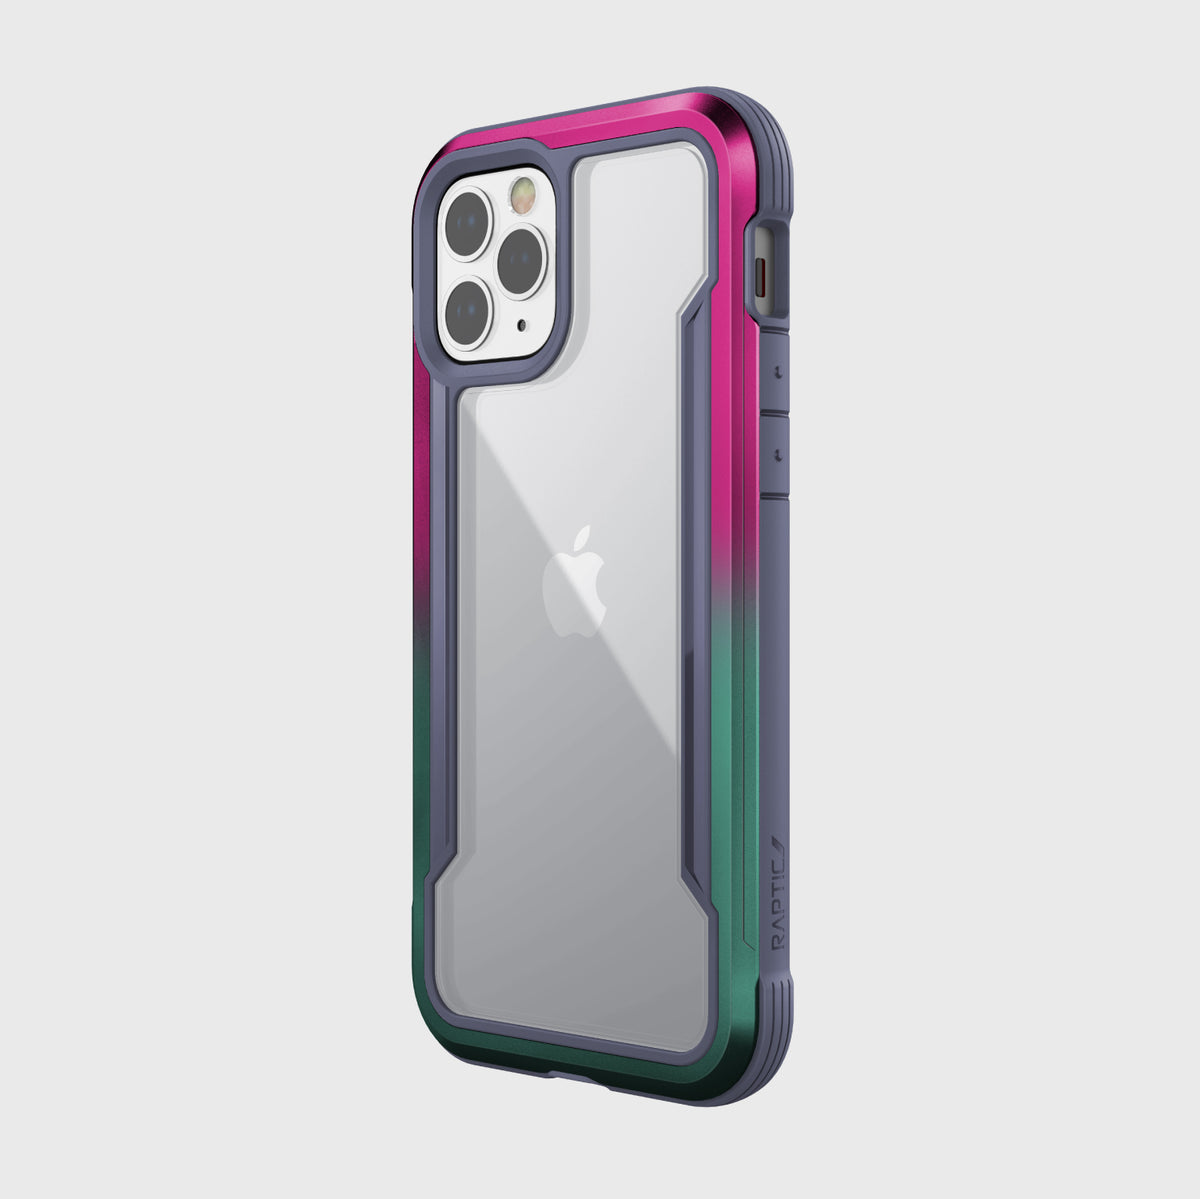 The back view of a Raptic Shield case in pink and green, providing 13' foot drop protection for the iPhone 12 Pro Max.